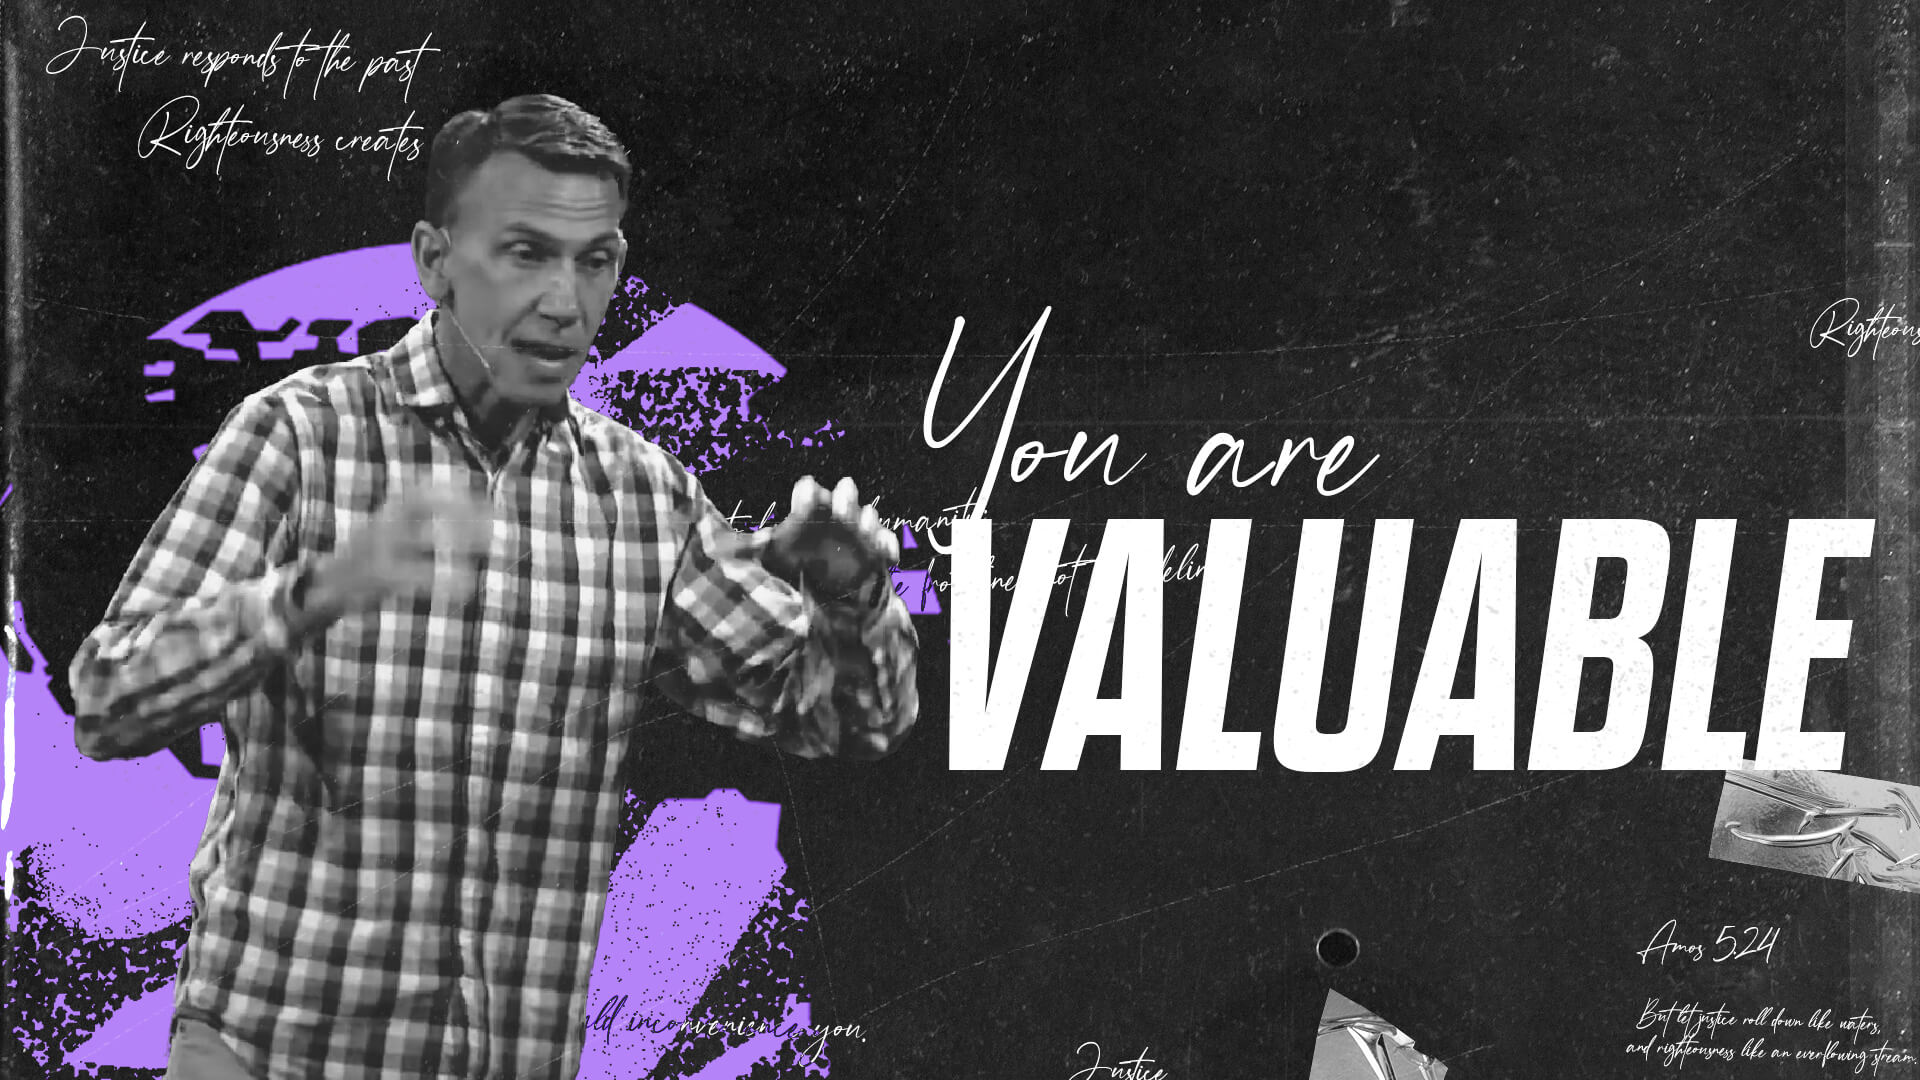 You Are Valuable